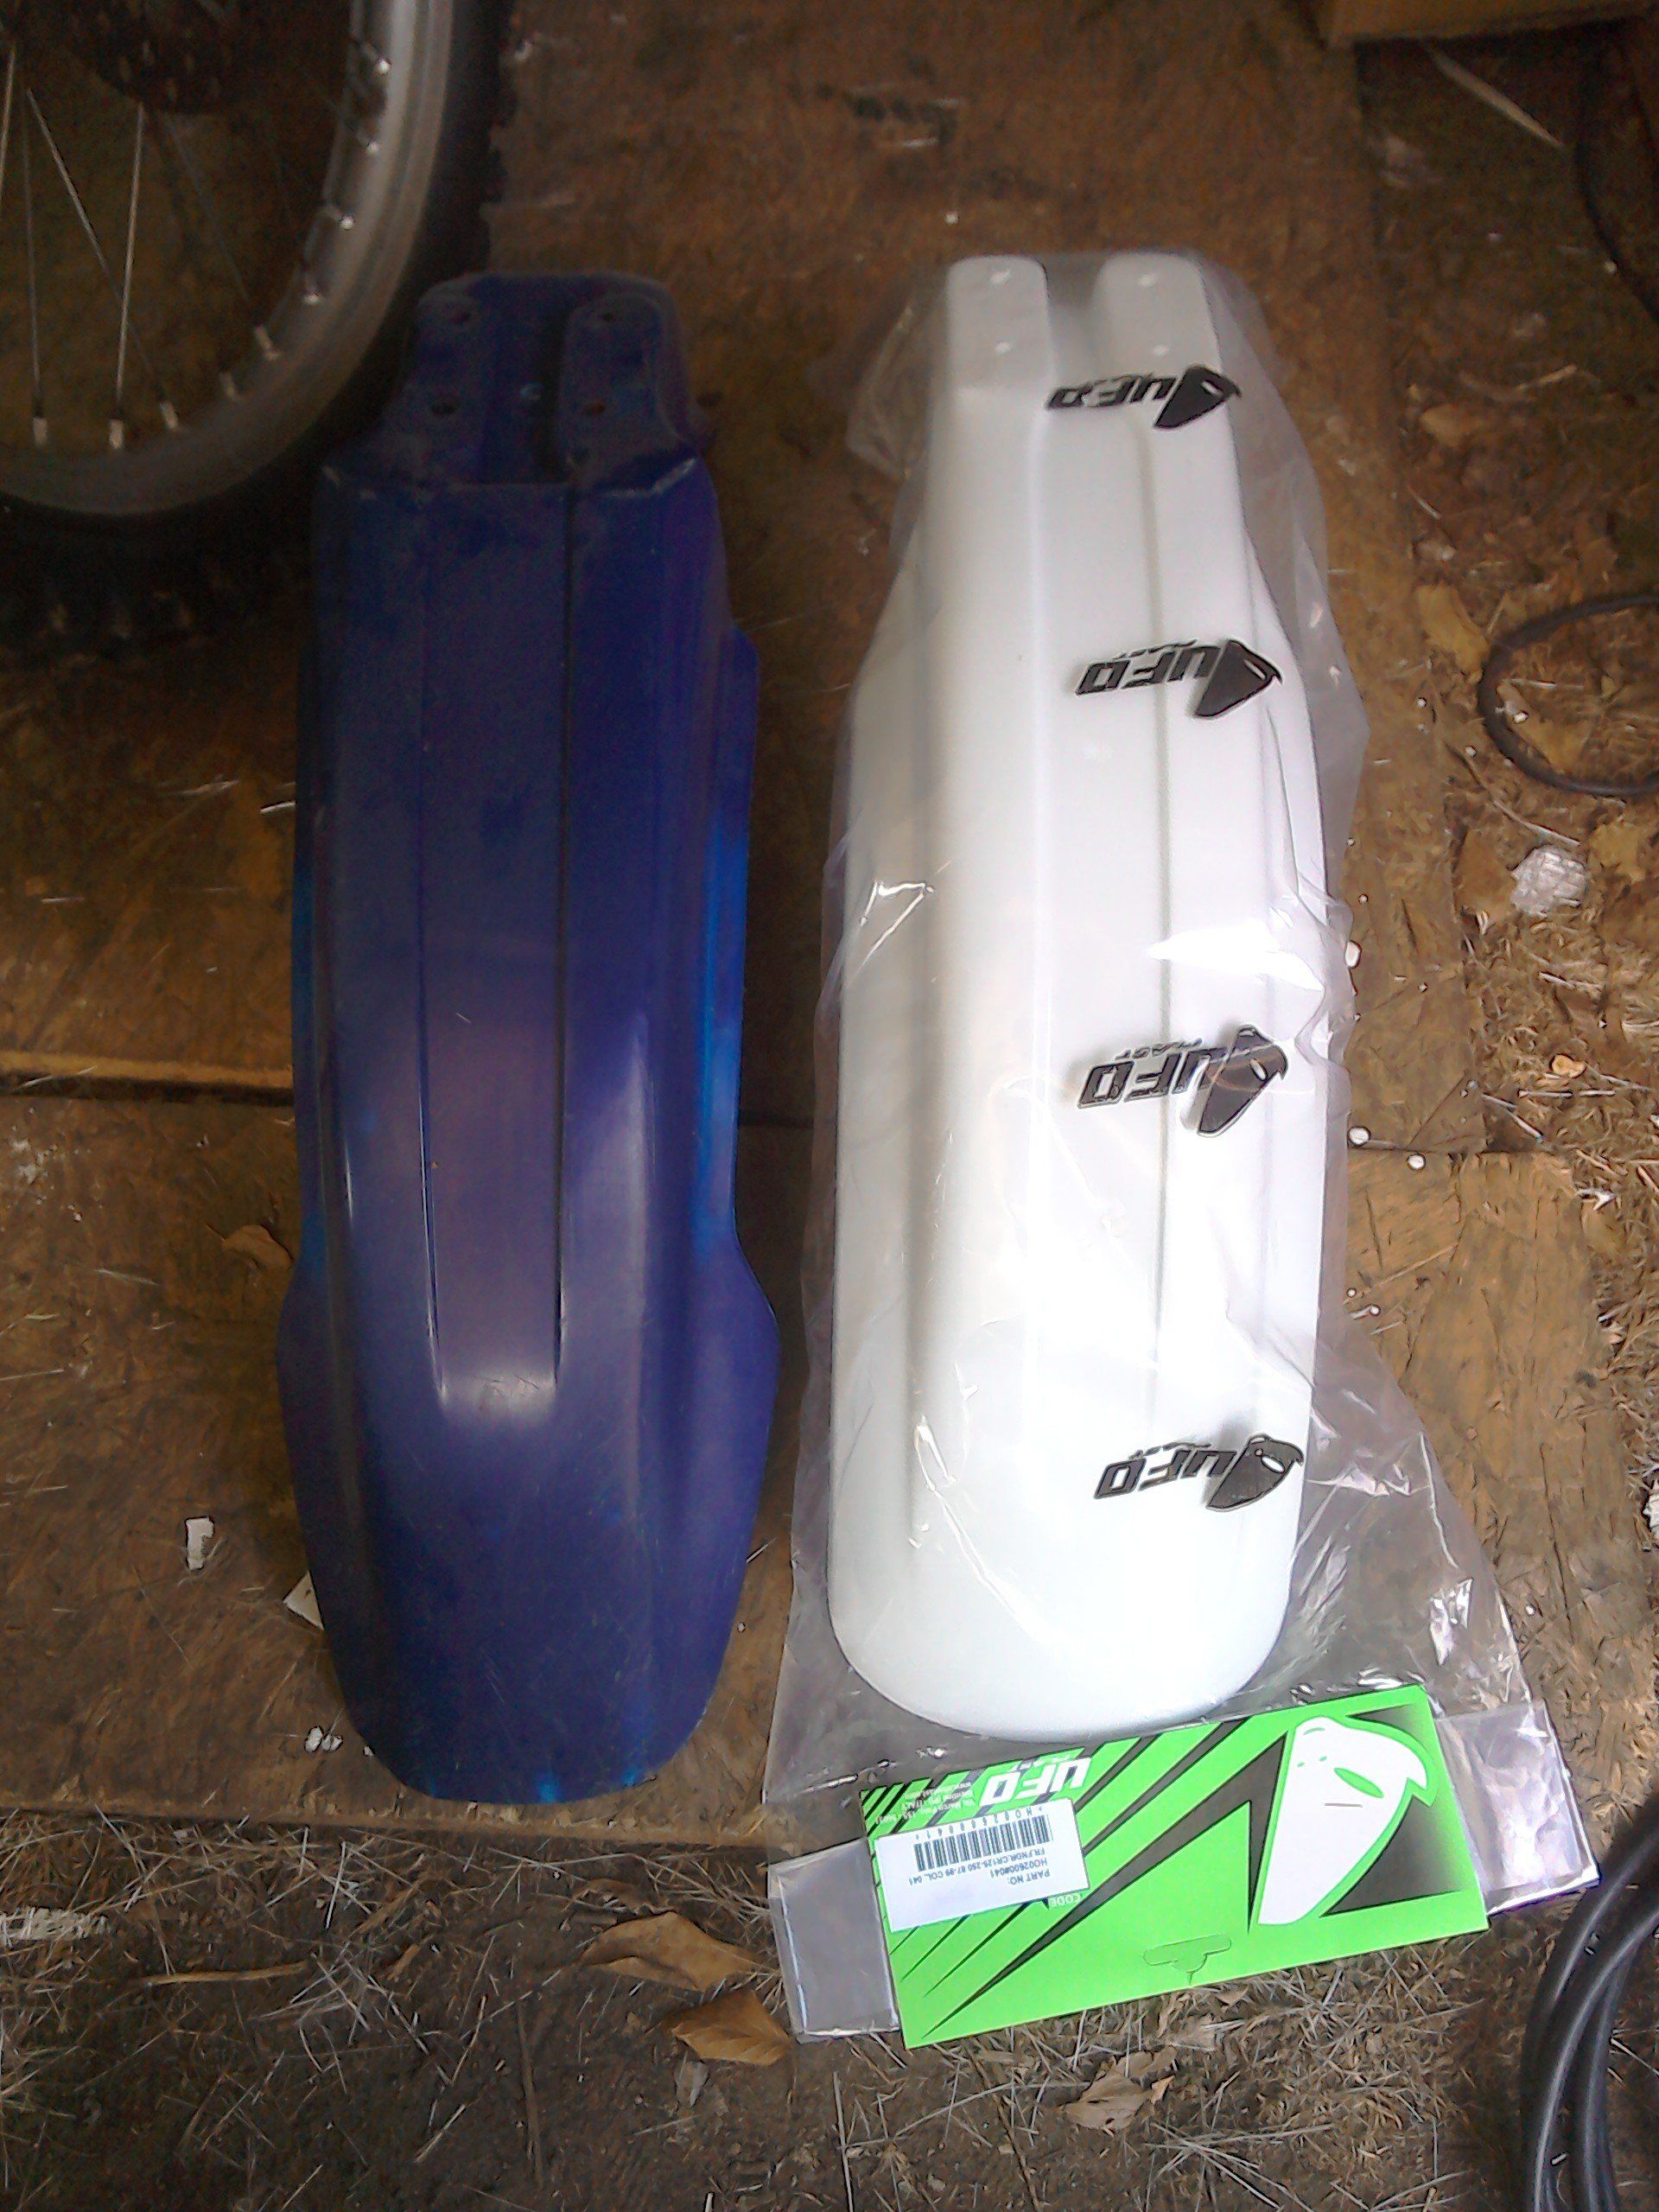 New front mudguard